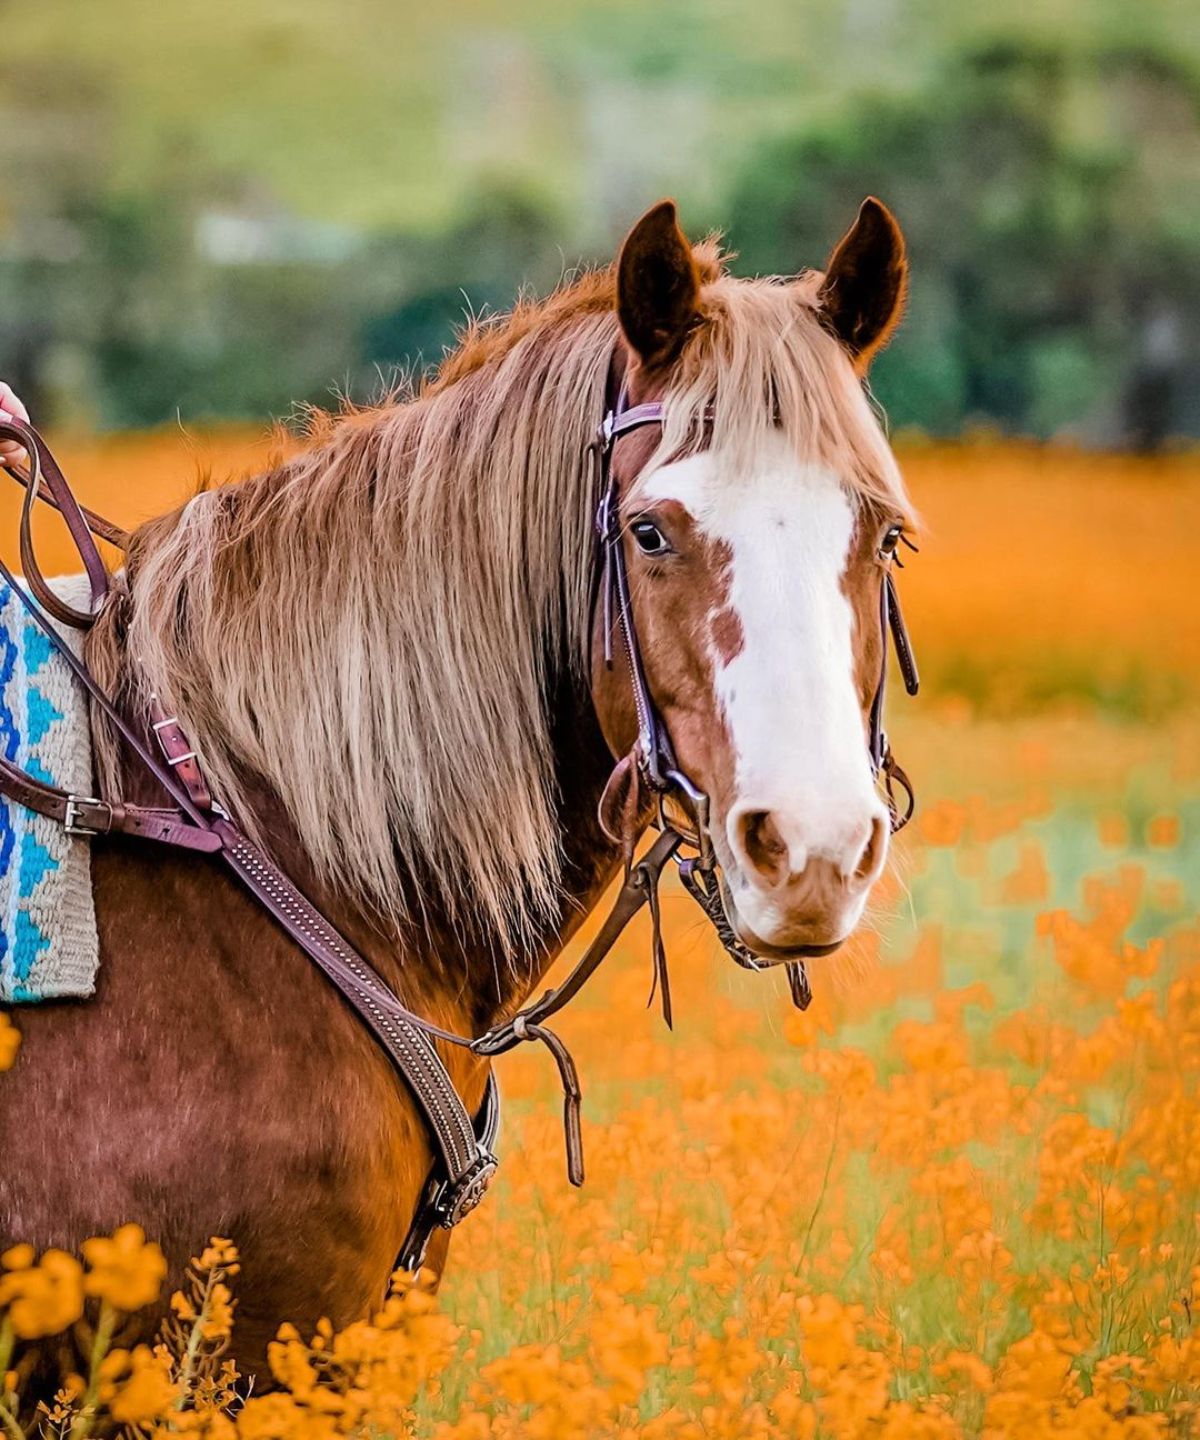 A sorrel chestnut horse with a light-brown mane stands on a meadow in orange bloom.